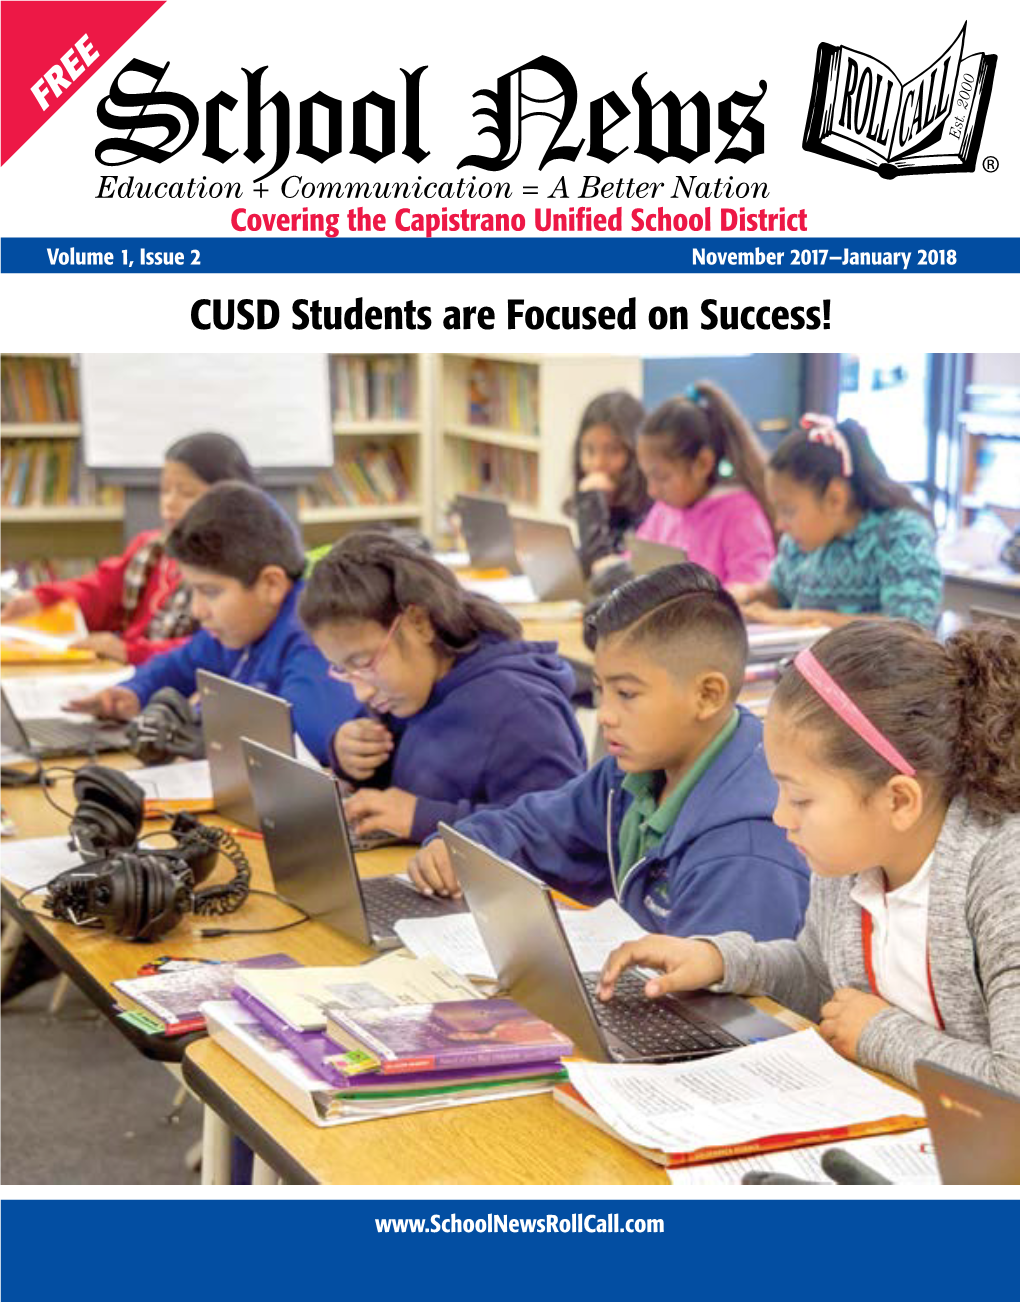 CUSD Students Are Focused on Success!